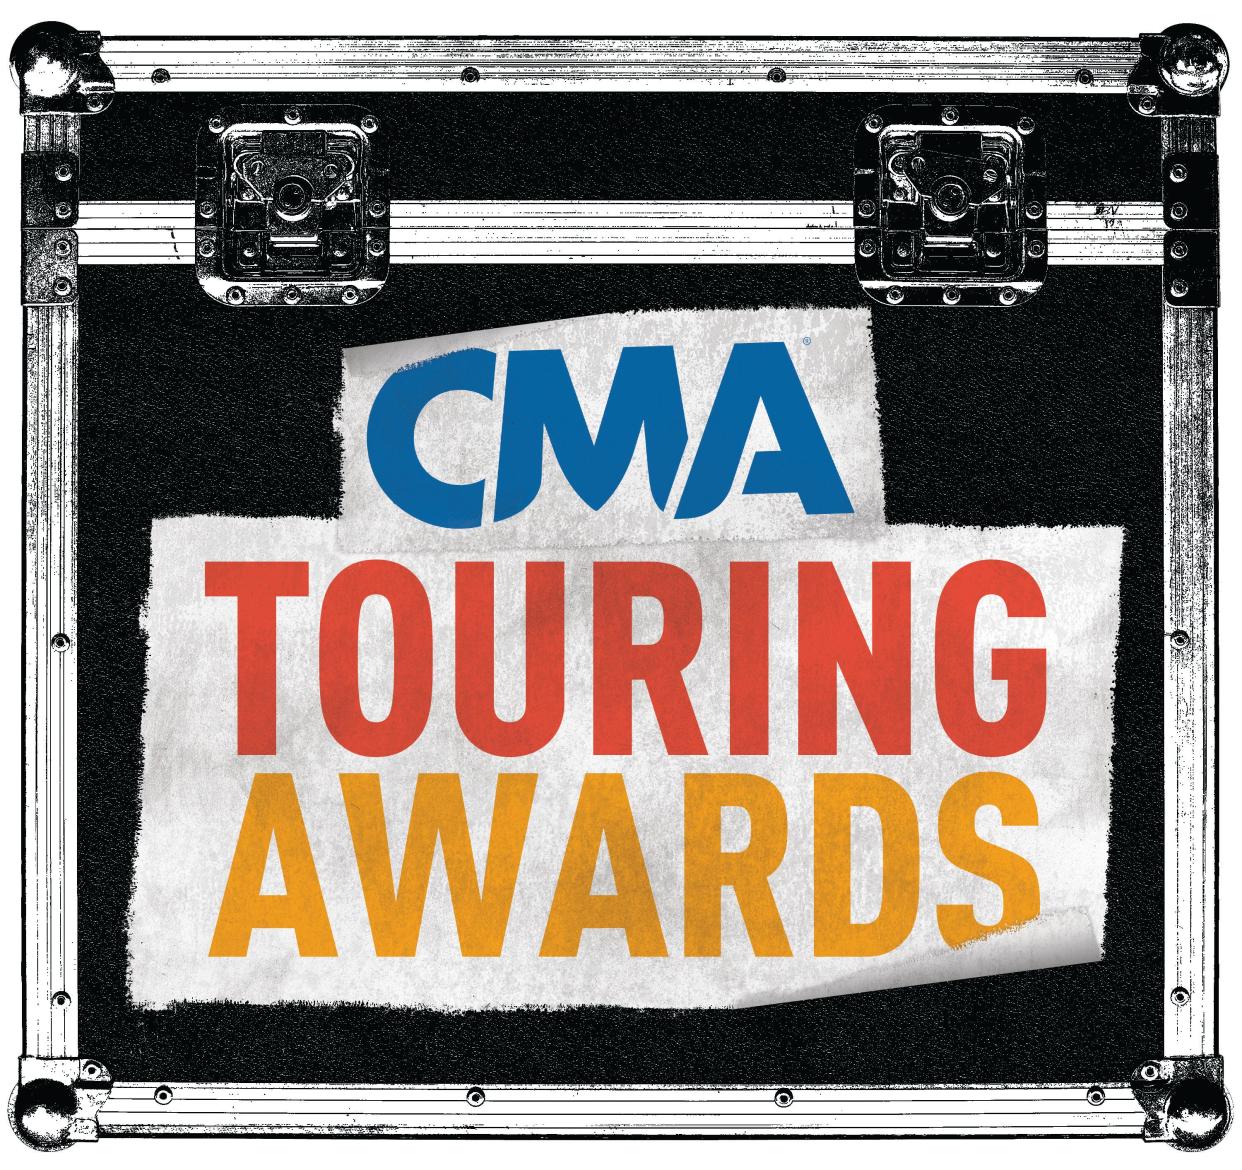 The ceremony for the 2023 CMA Touring Awards will take place on Feb. 12 in Nashville.